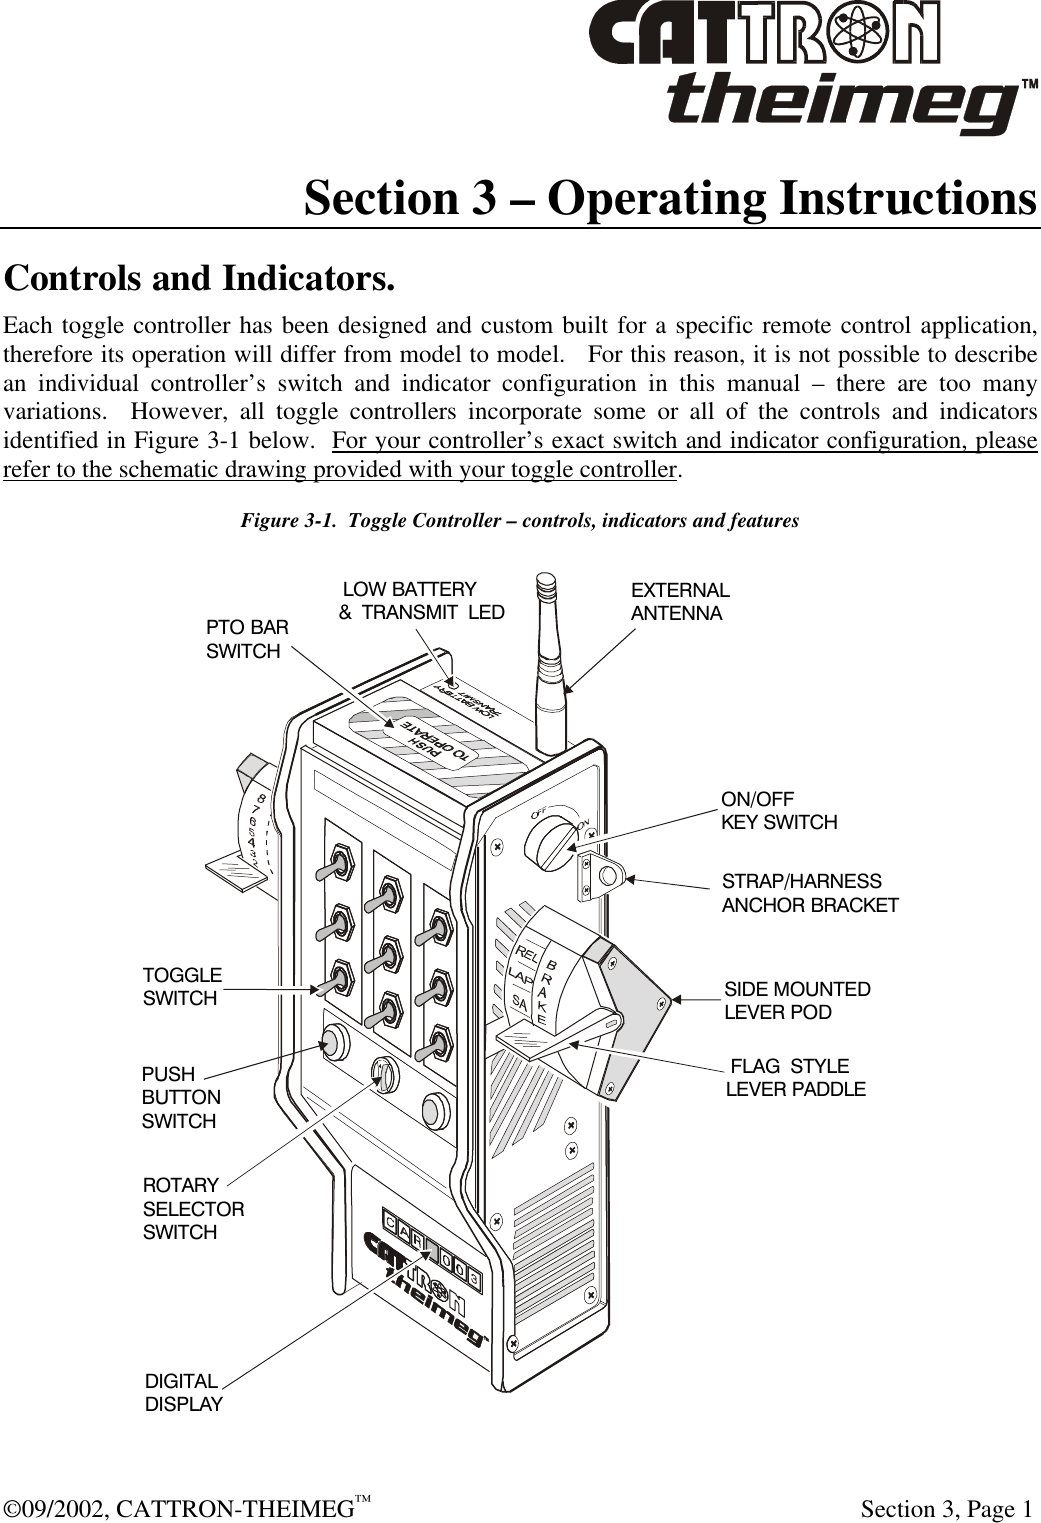  ©09/2002, CATTRON-THEIMEG™   Section 3, Page 1 Section 3 – Operating Instructions  Controls and Indicators. Each toggle controller has been designed and custom built for a specific remote control application, therefore its operation will differ from model to model.   For this reason, it is not possible to describe an individual controller’s switch and indicator configuration in this manual – there are too many variations.  However, all toggle controllers incorporate some or all of the controls and indicators identified in Figure 3-1 below.  For your controller’s exact switch and indicator configuration, please refer to the schematic drawing provided with your toggle controller. Figure 3-1.  Toggle Controller – controls, indicators and features PTO BAR SWITCHON/OFFKEY SWITCHEXTERNAL ANTENNA‘LOW BATTERY’&amp; ‘TRANSMIT’ LEDSTRAP/HARNESSANCHOR BRACKETSIDE MOUNTEDLEVER POD‘FLAG’ STYLELEVER PADDLETOGGLESWITCHPUSHBUTTONSWITCHROTARYSELECTORSWITCHDIGITALDISPLAY 